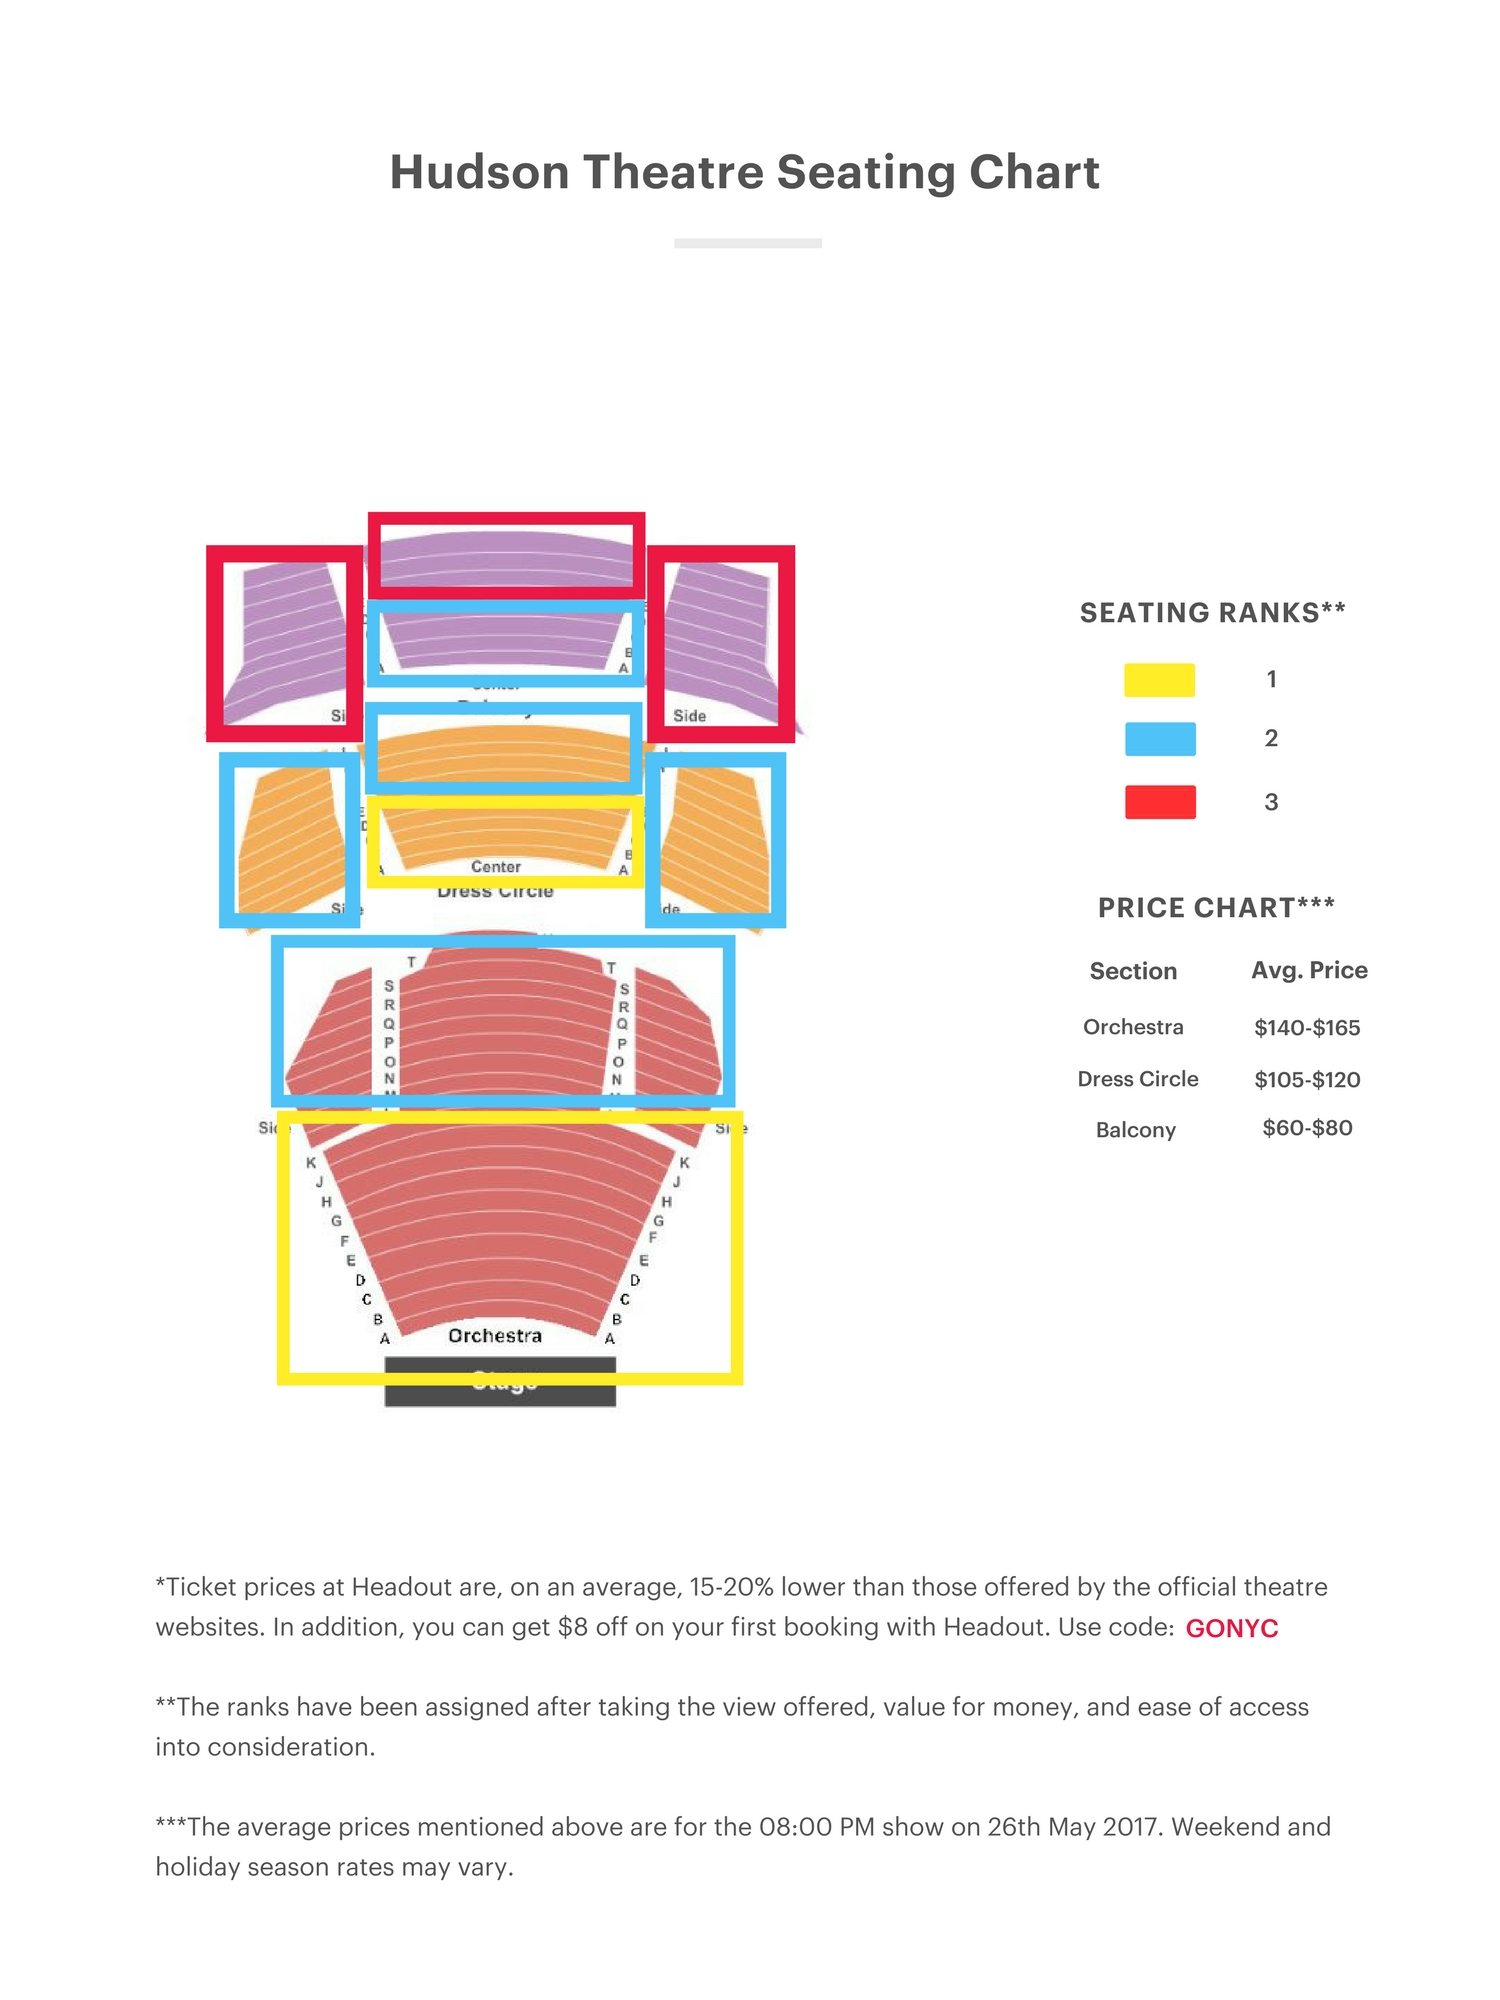 1984 Seating Guide – Hudson Theater Seating Chart